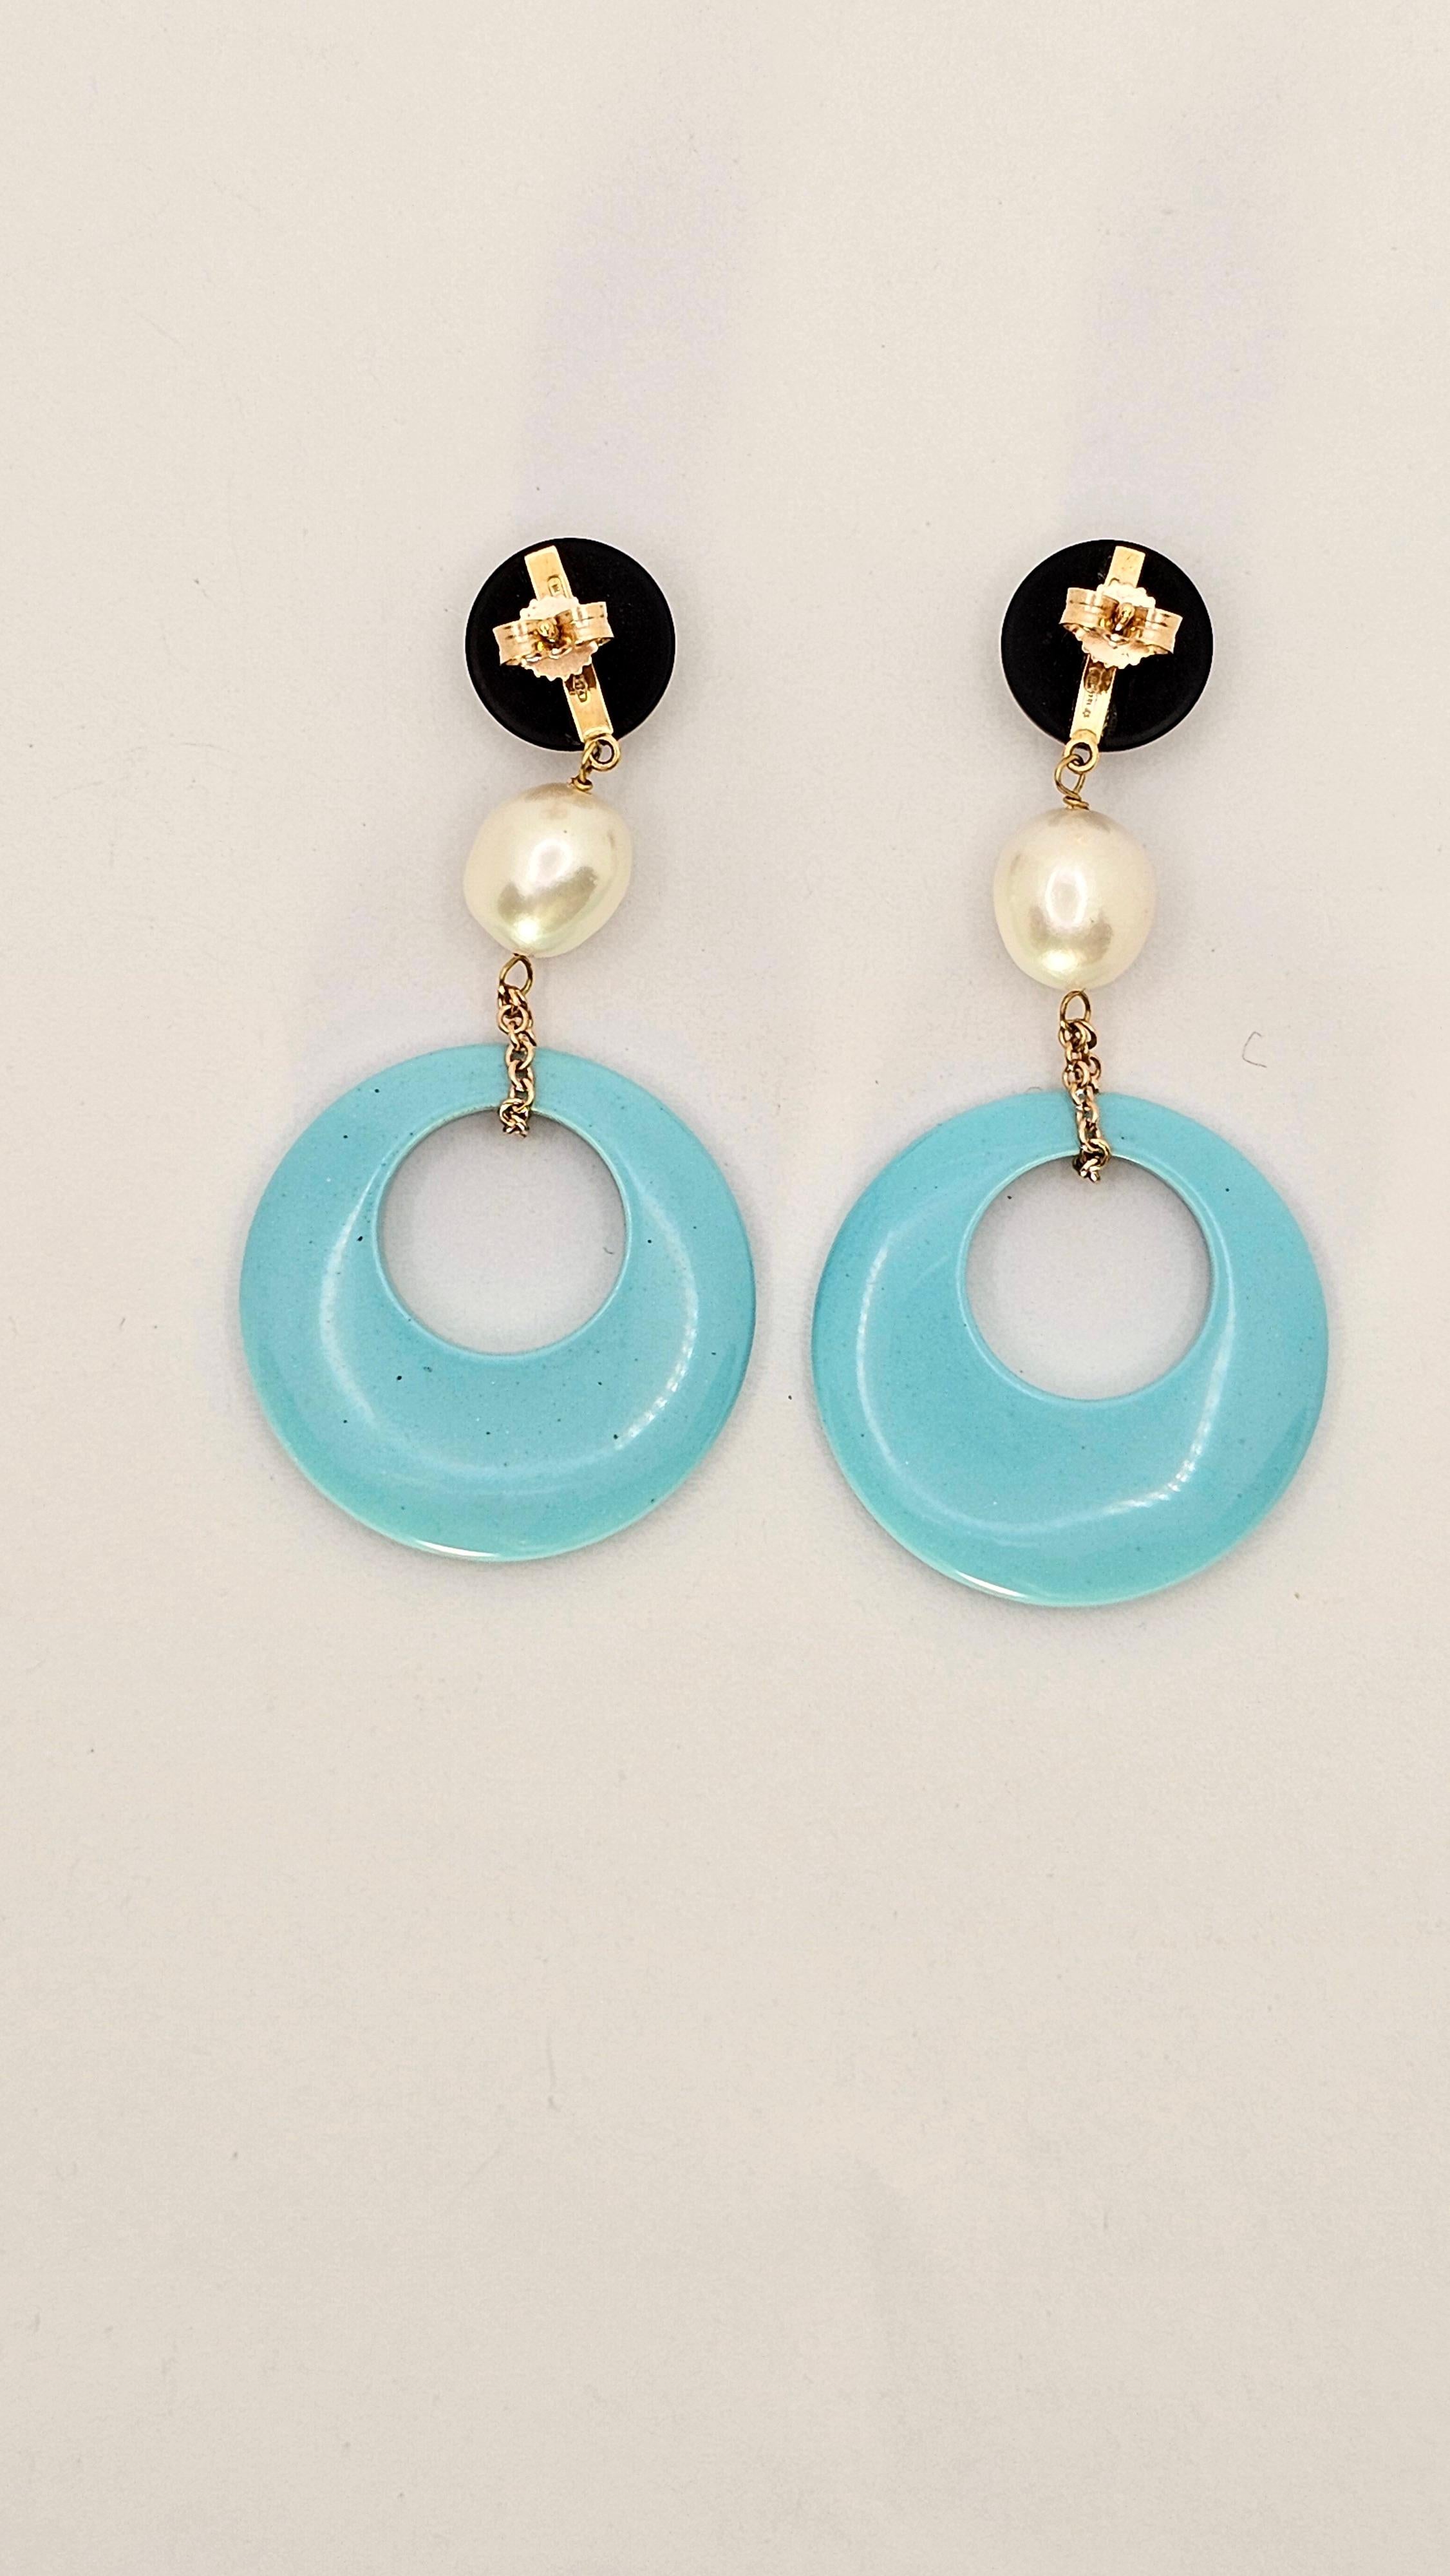 Contemporary Chandelier Earrings in Rose Gold, Turquoise Paste, Jade and Pearls For Sale